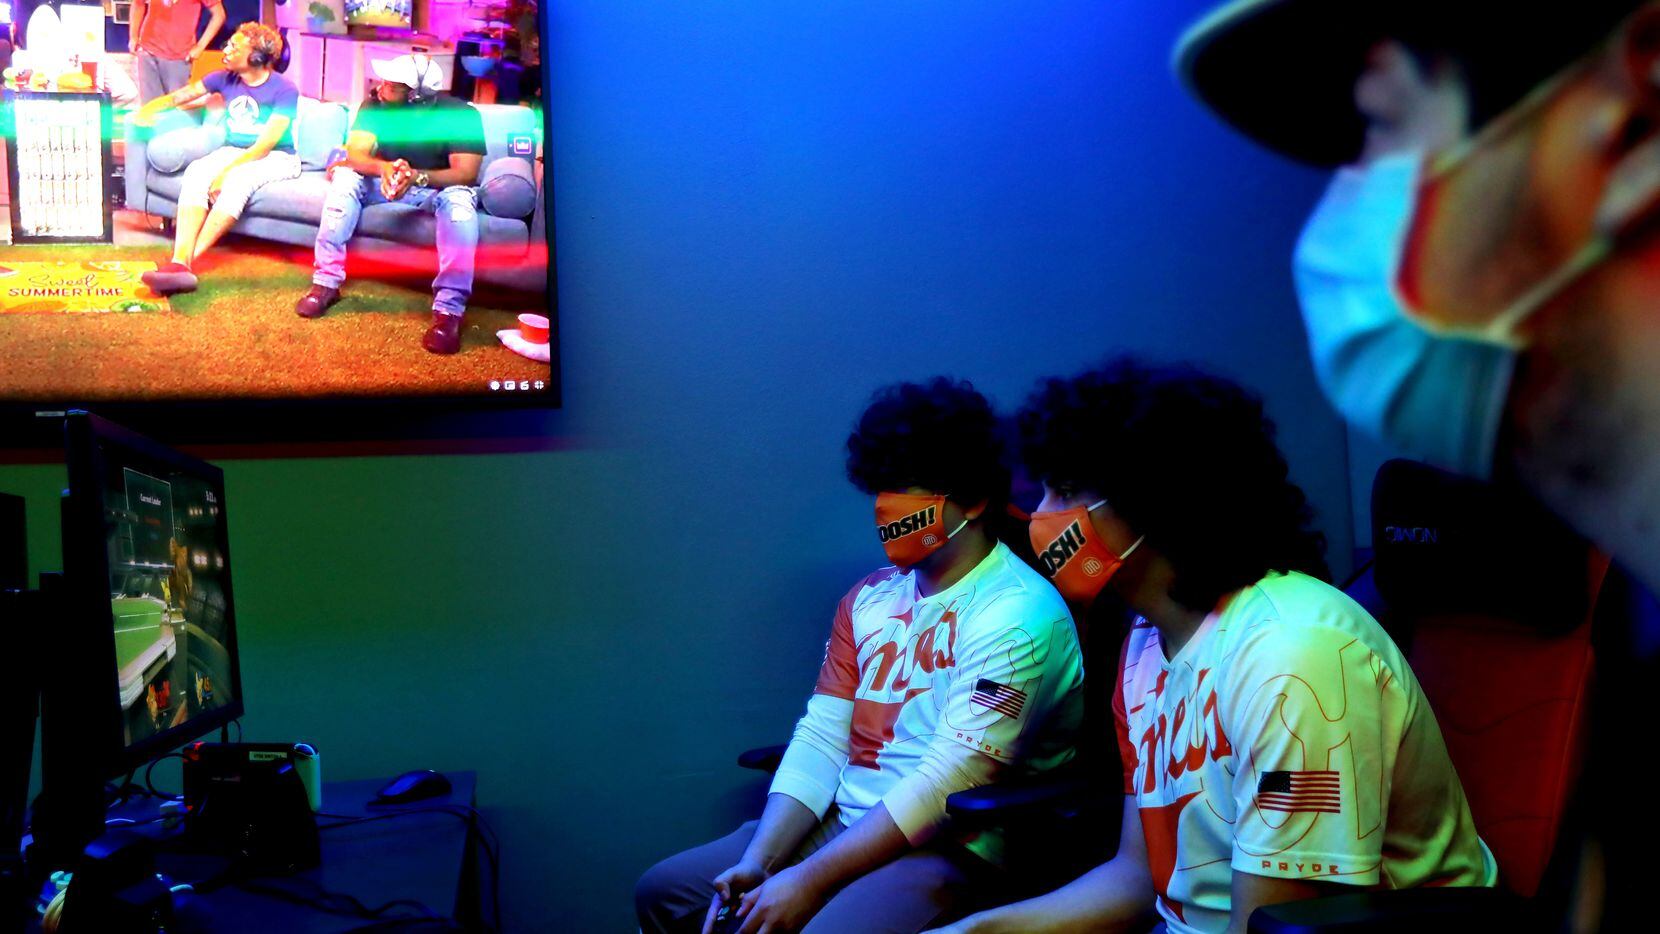 From left, Chaynen Casas, Marcel Hayek and Sean Fox of the Super Smash Bros team play at the...